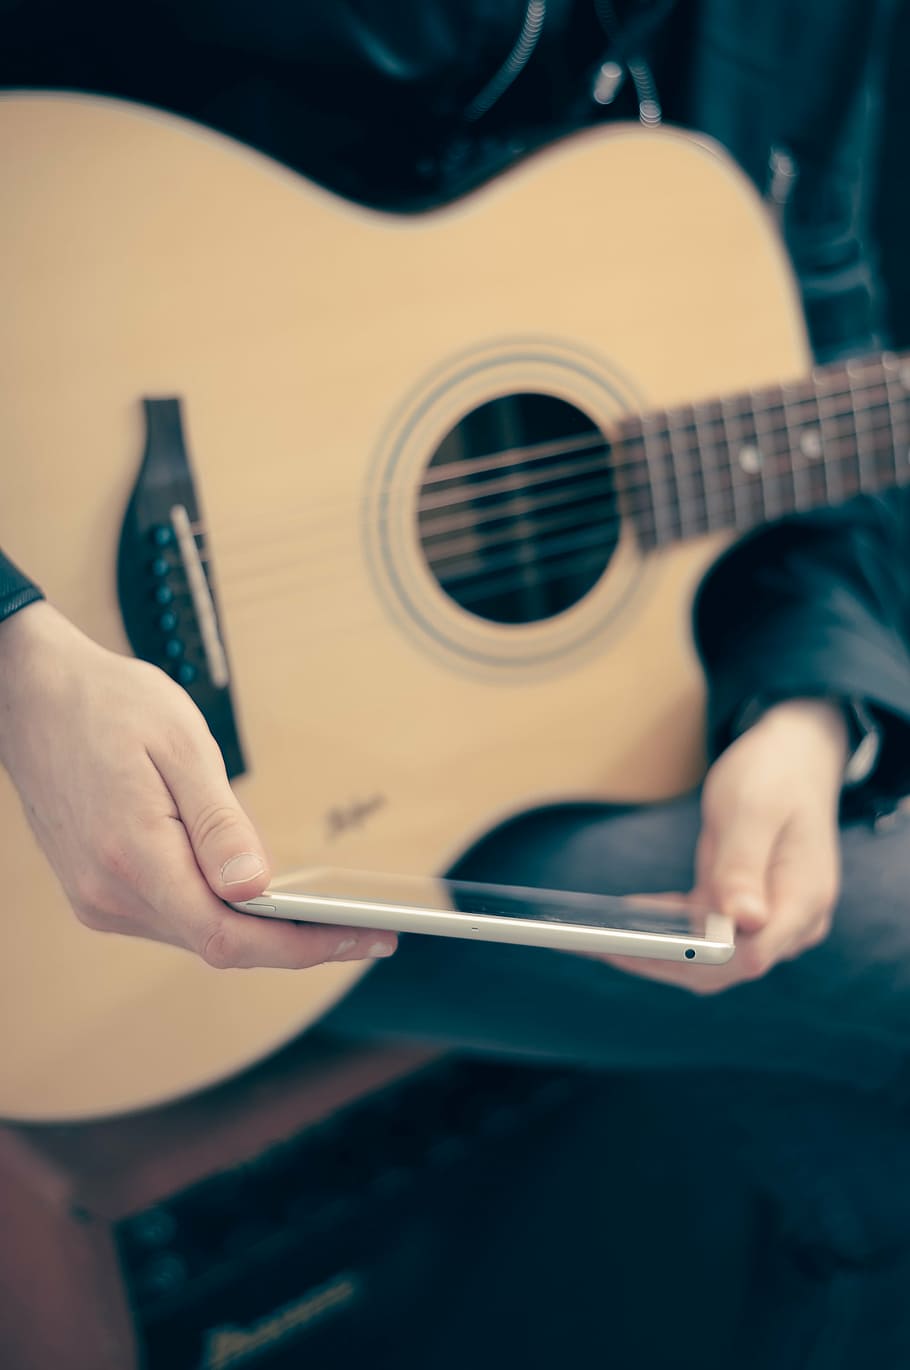 person, holding, white, android smartphone, smartphone, ipad, tablet, acoustic guitar, musician, music